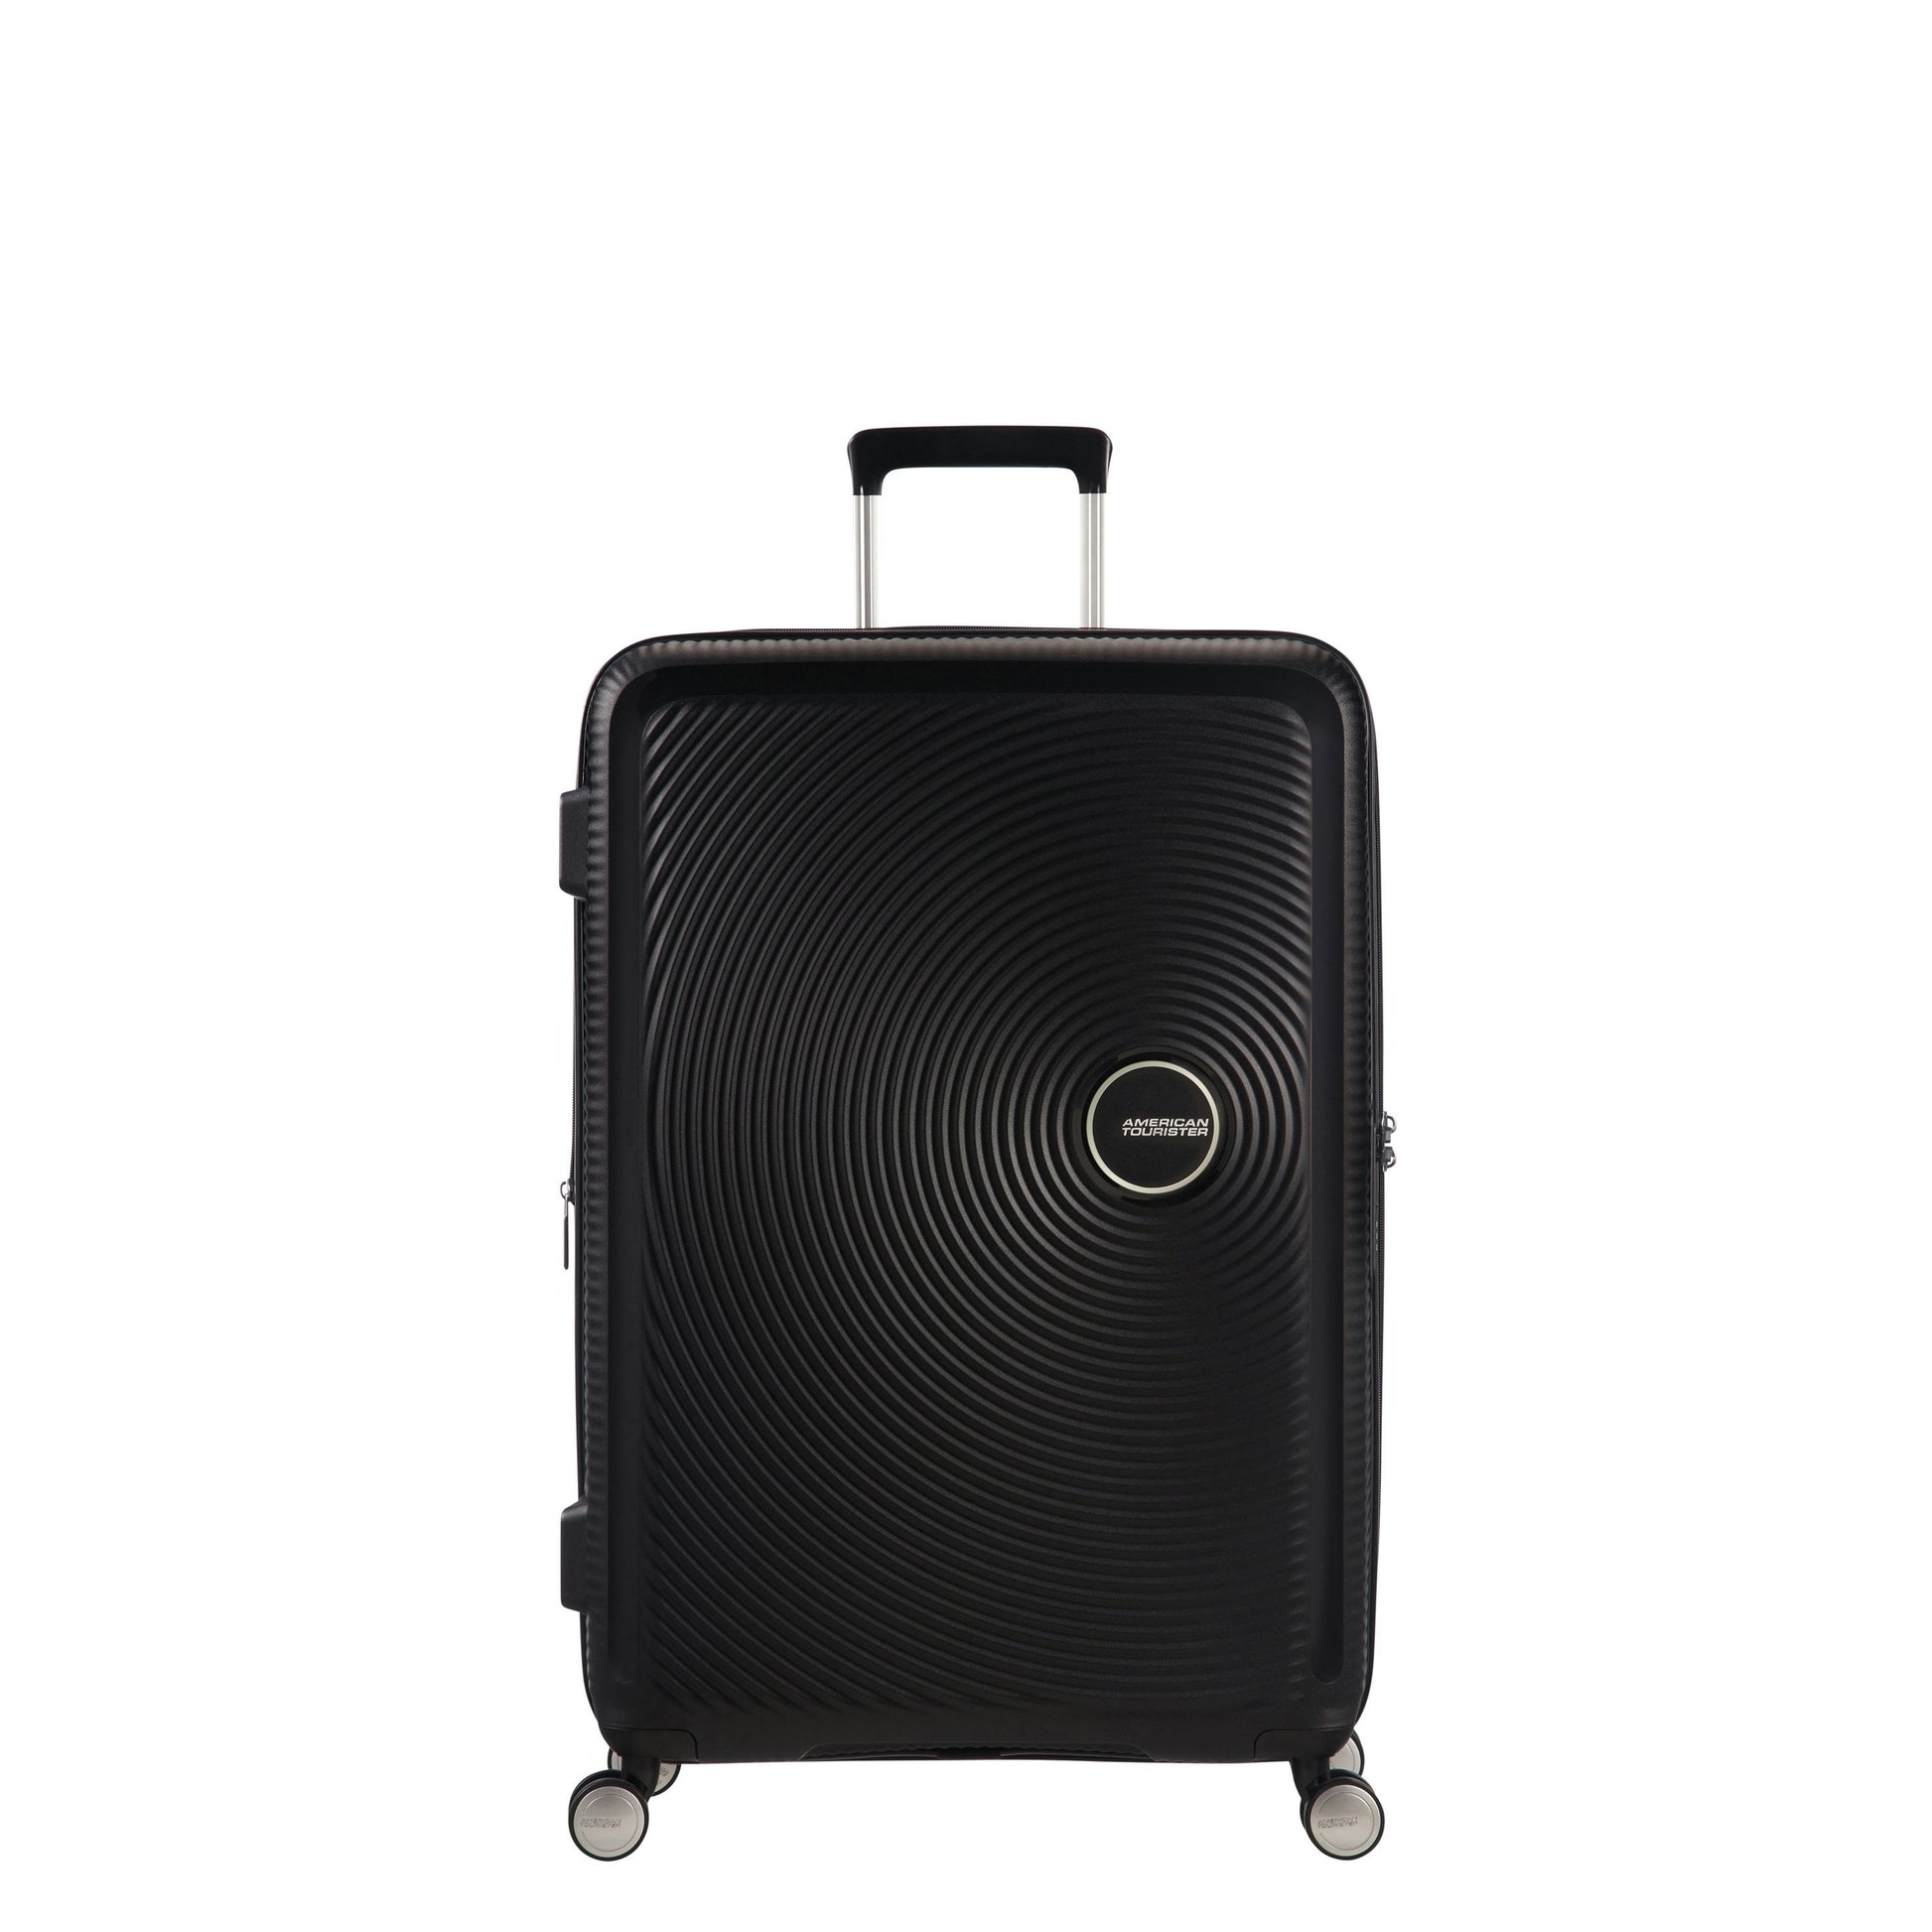 American Tourister Curio Spinner Medium Expandable Luggage - Bass Black